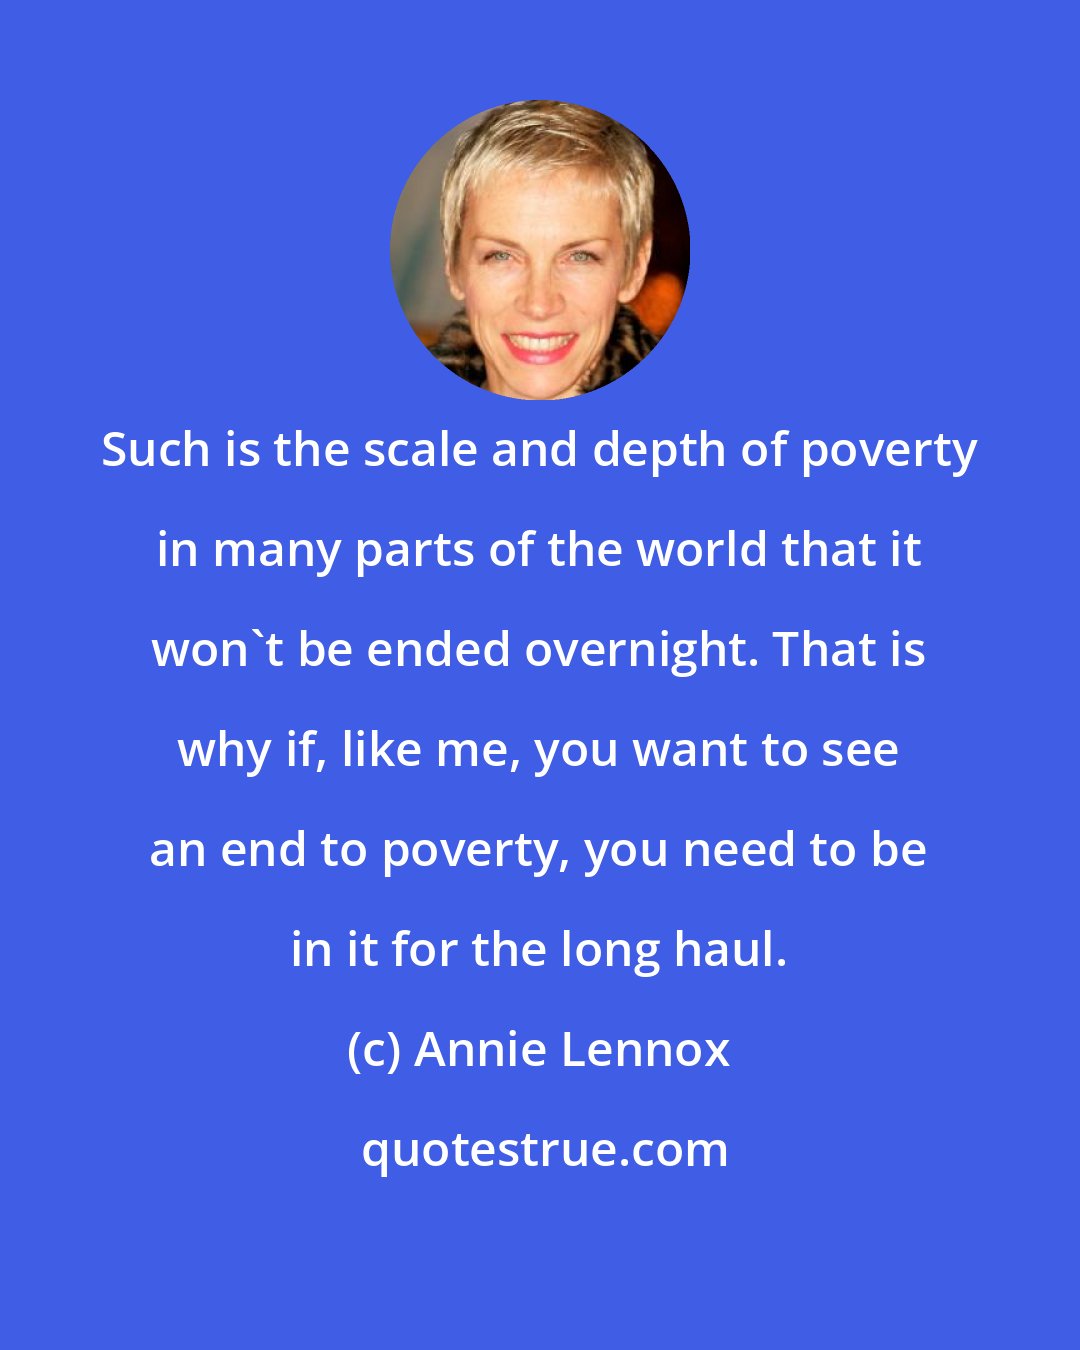 Annie Lennox: Such is the scale and depth of poverty in many parts of the world that it won't be ended overnight. That is why if, like me, you want to see an end to poverty, you need to be in it for the long haul.